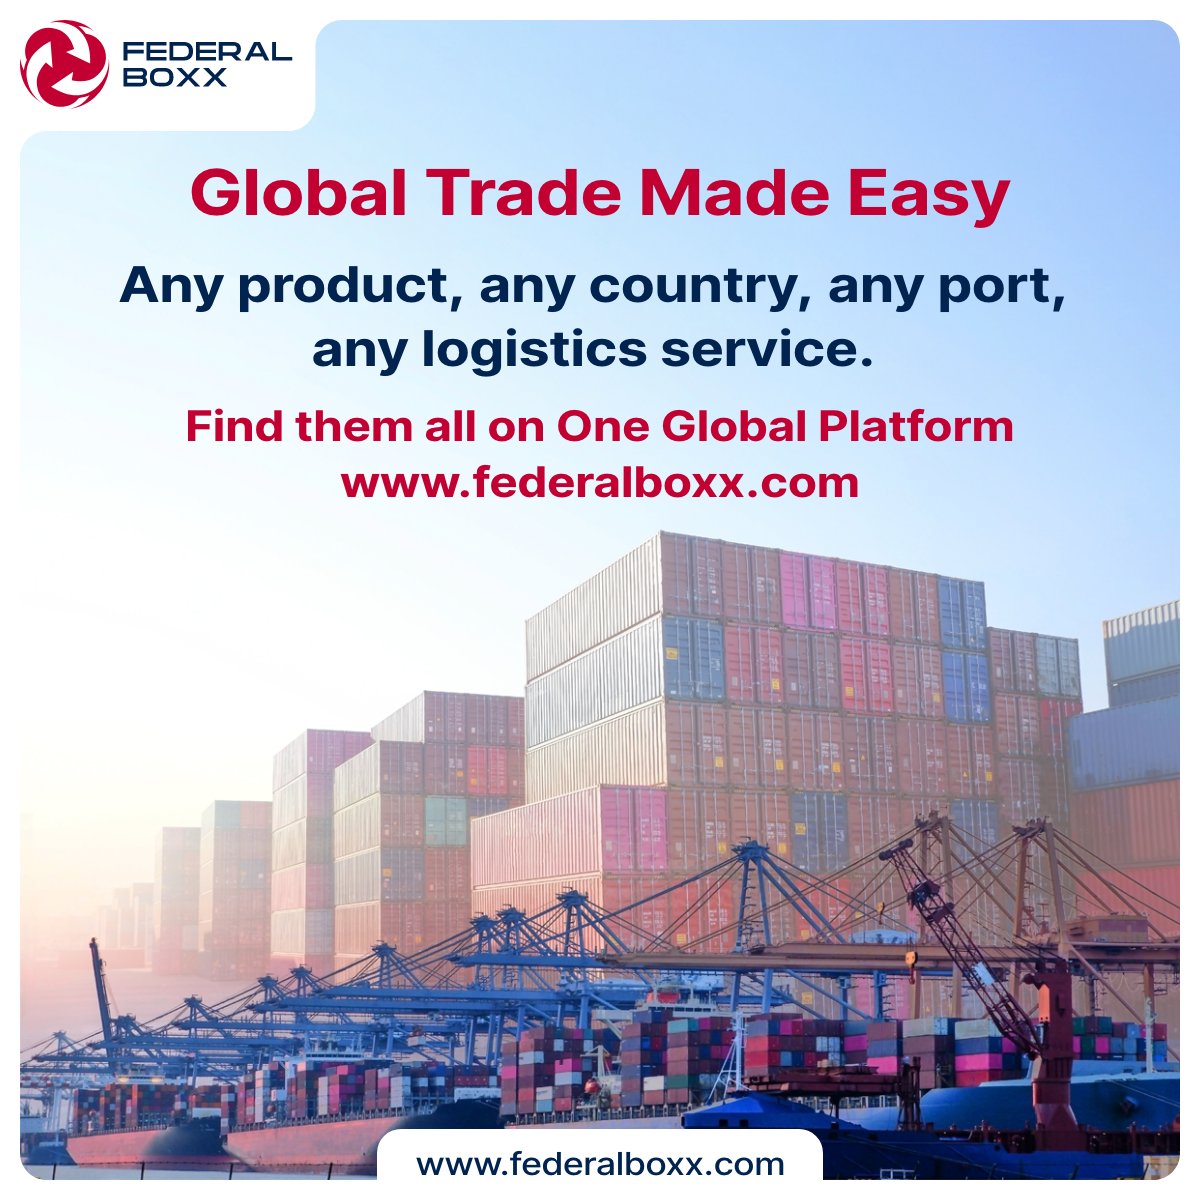 Discover Any Product, From Any Country, at Any Port, with Any Logistics Service. All on One Global Platform - federalboxx.com #GlobalTrade #LogisticsSolutions #ImportExport #Shipping #TradePlatform #FederalBoxx #BusinessGrowth #InternationalTrade